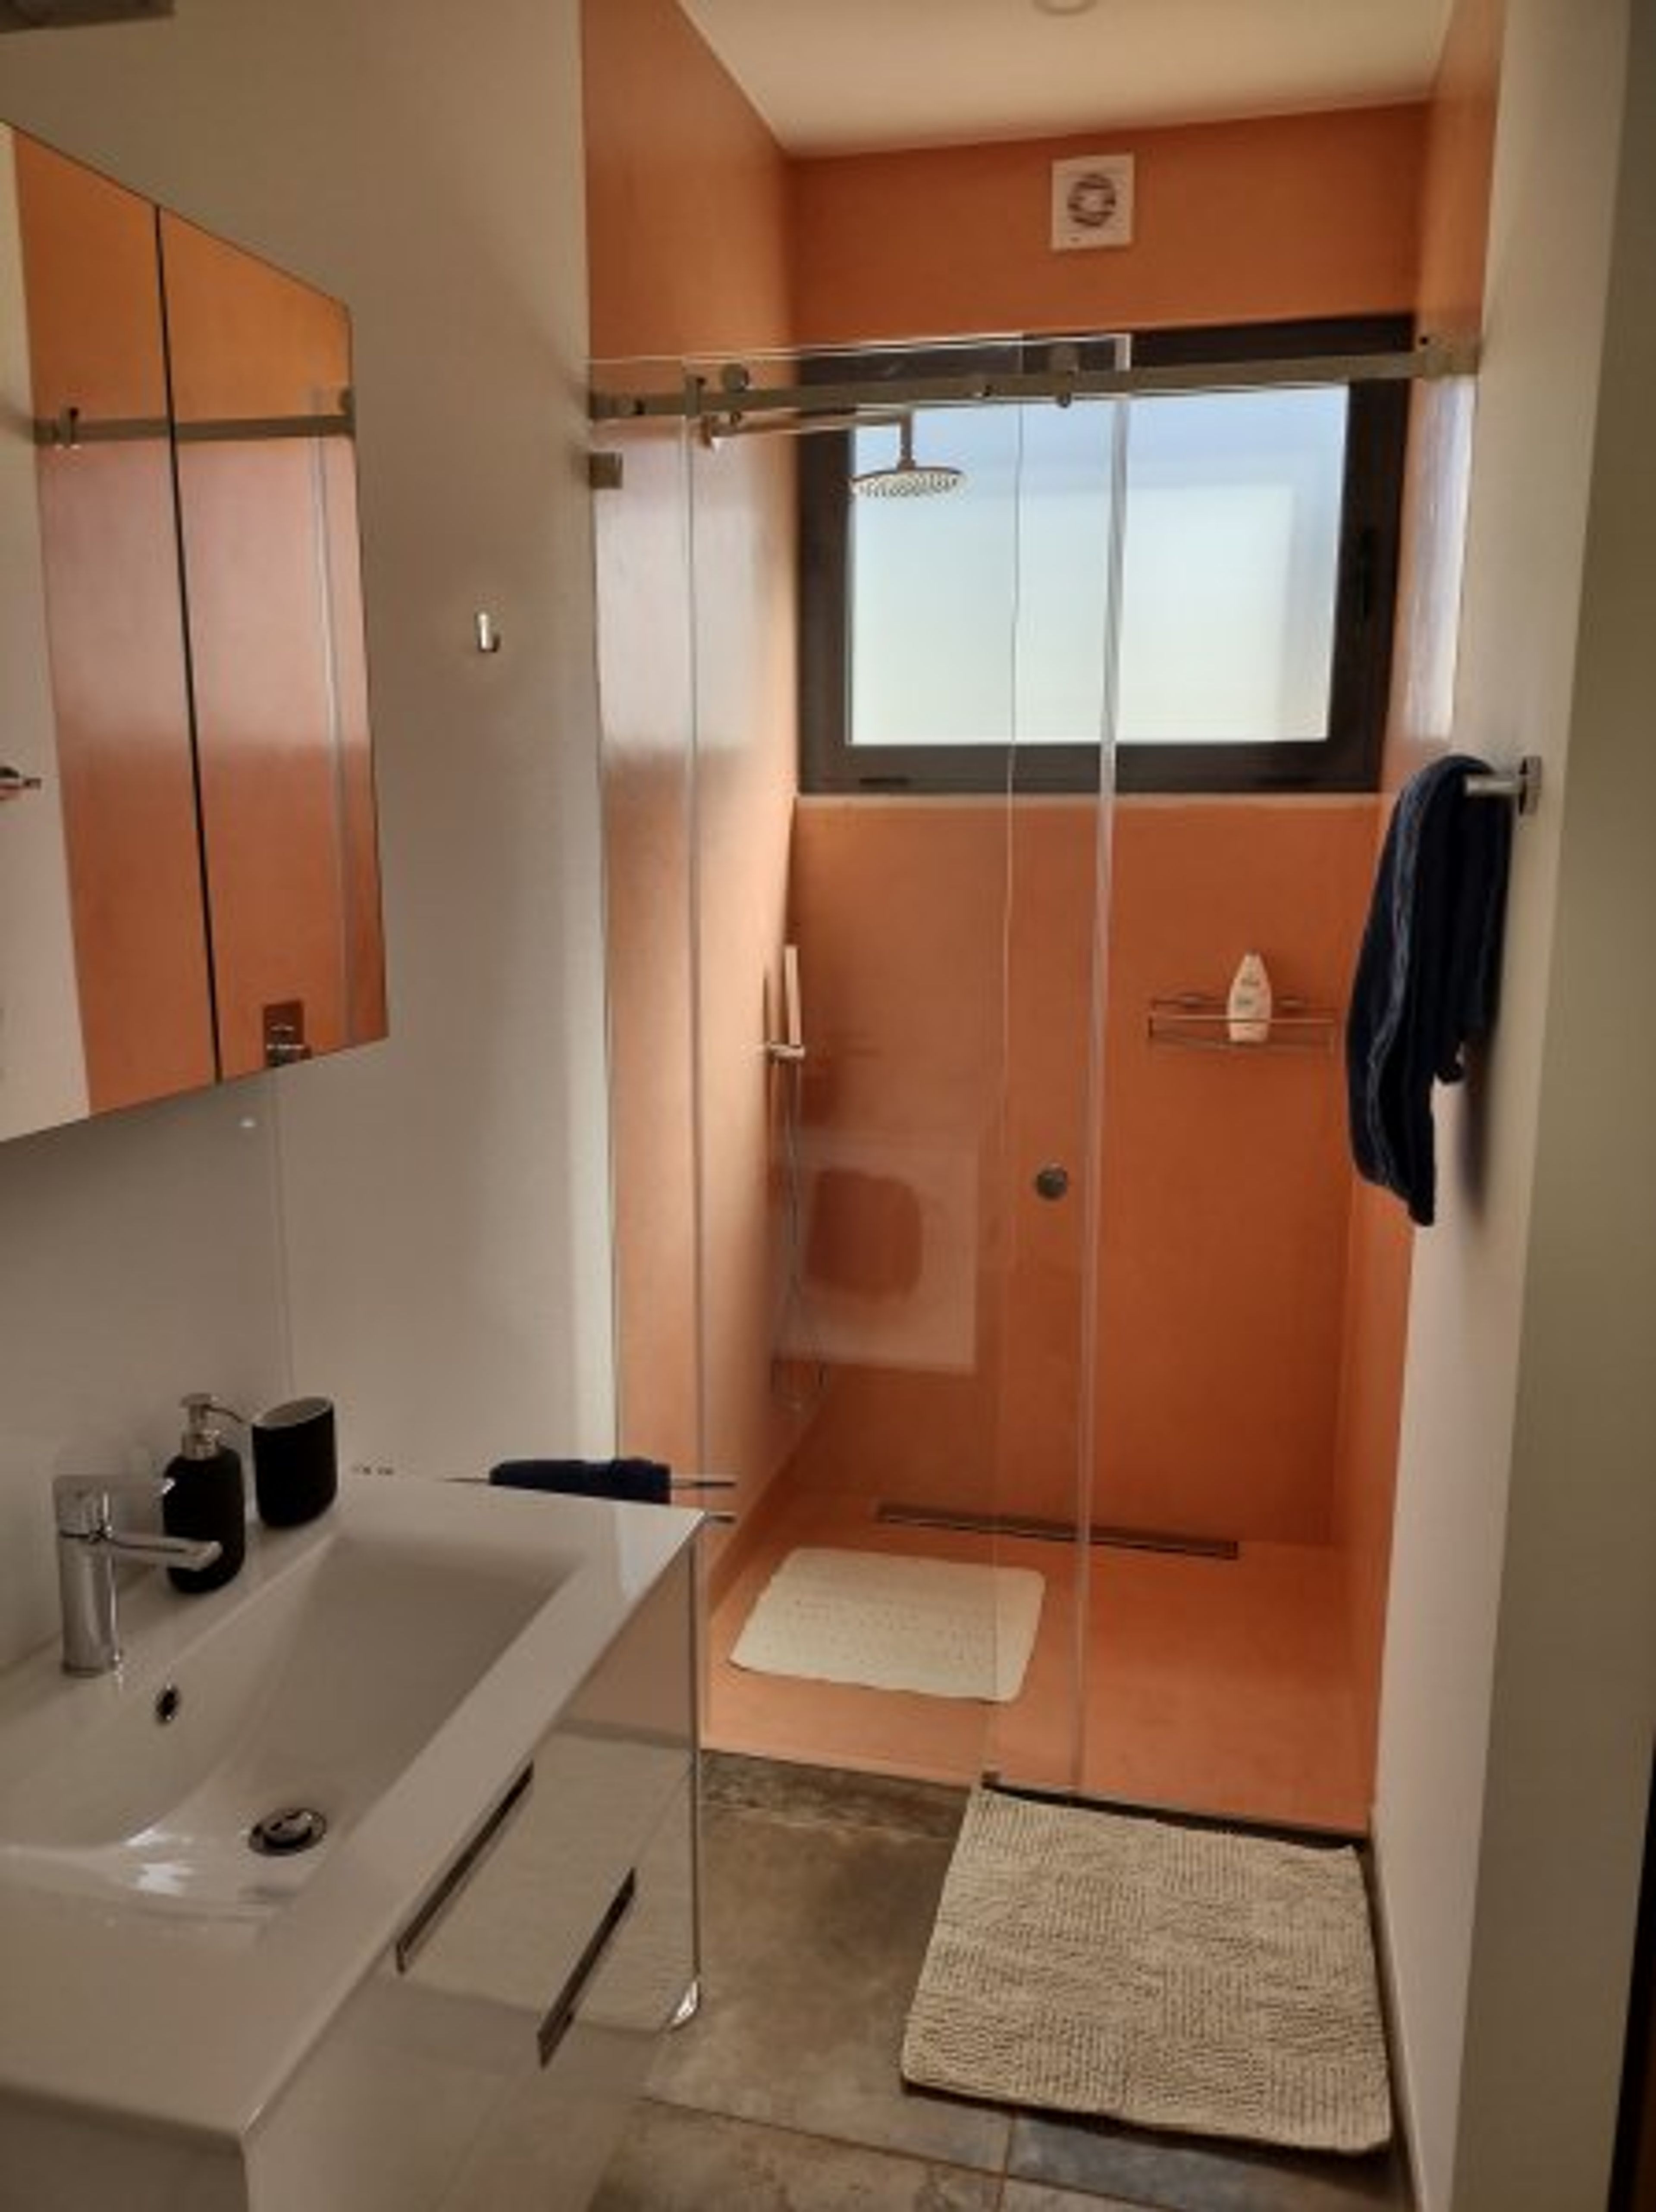 shower sheets, towels, washbasin with mirror cabinet.